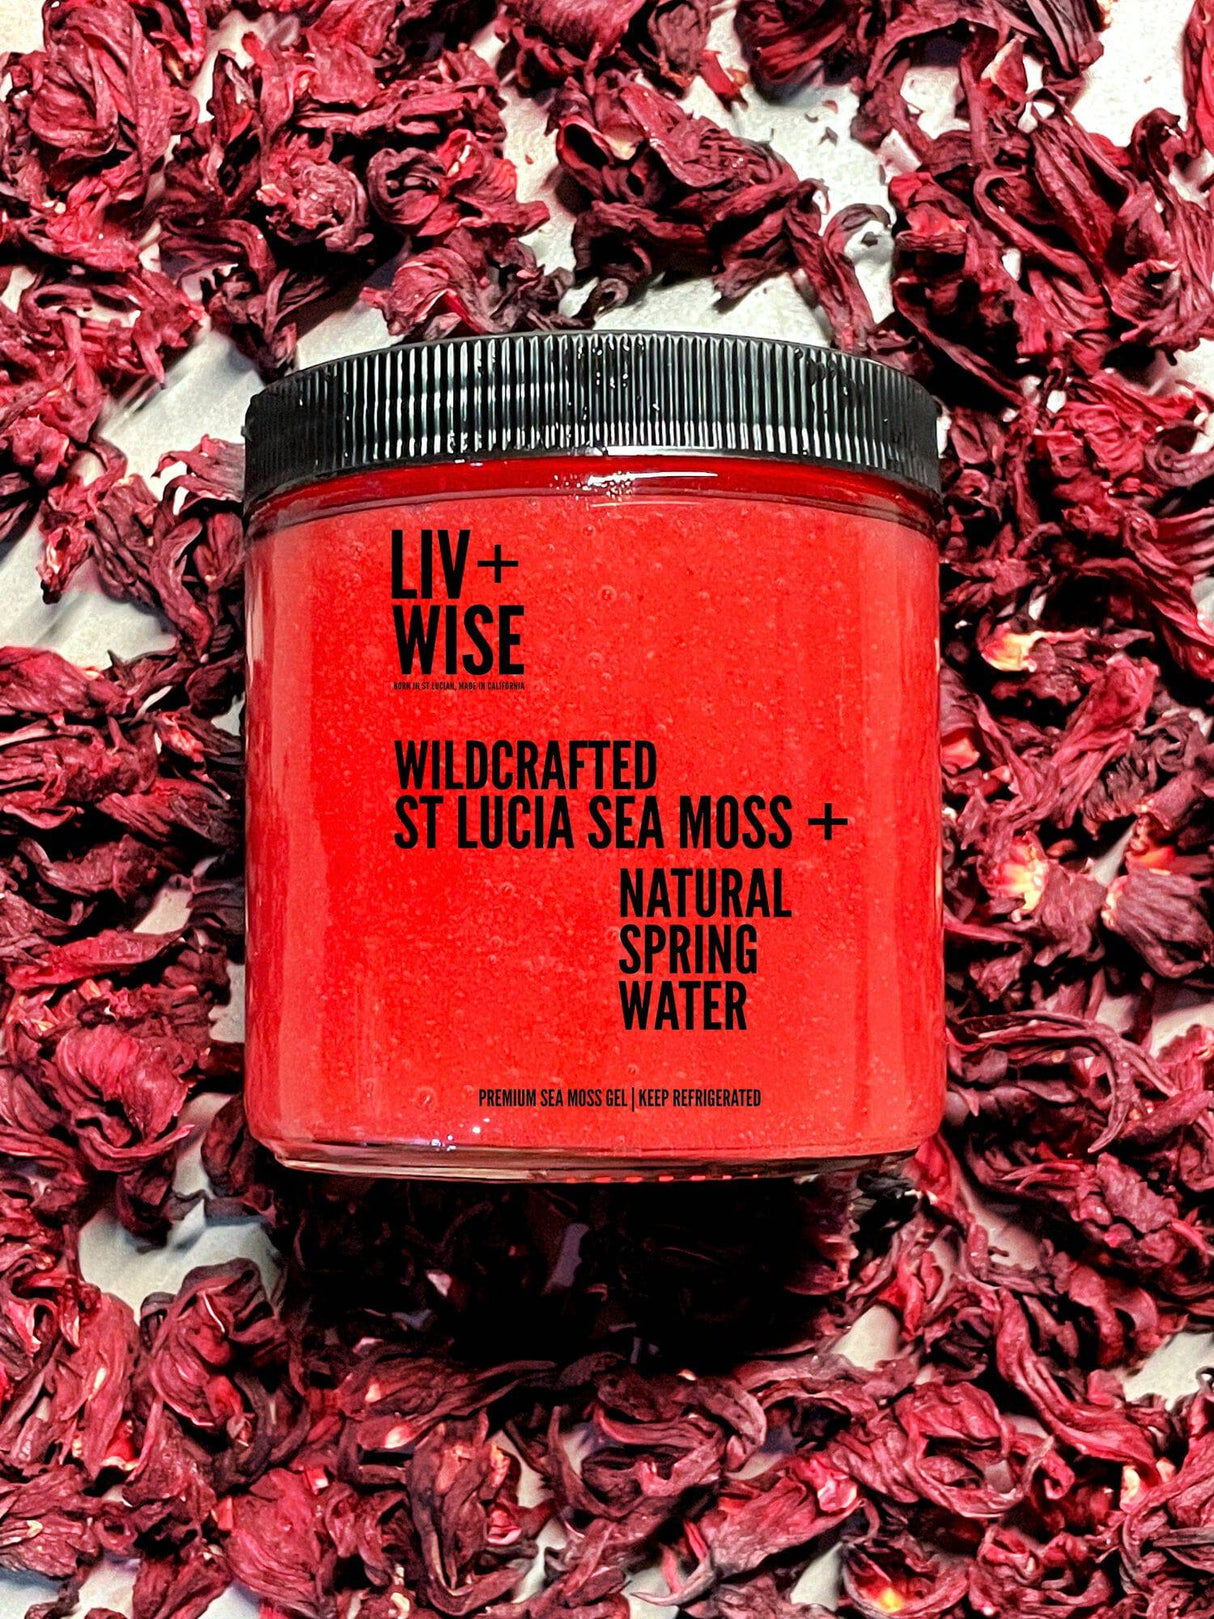 Seamoss - Liv + Wise (Only In-store) - Prime Sports Nutrition